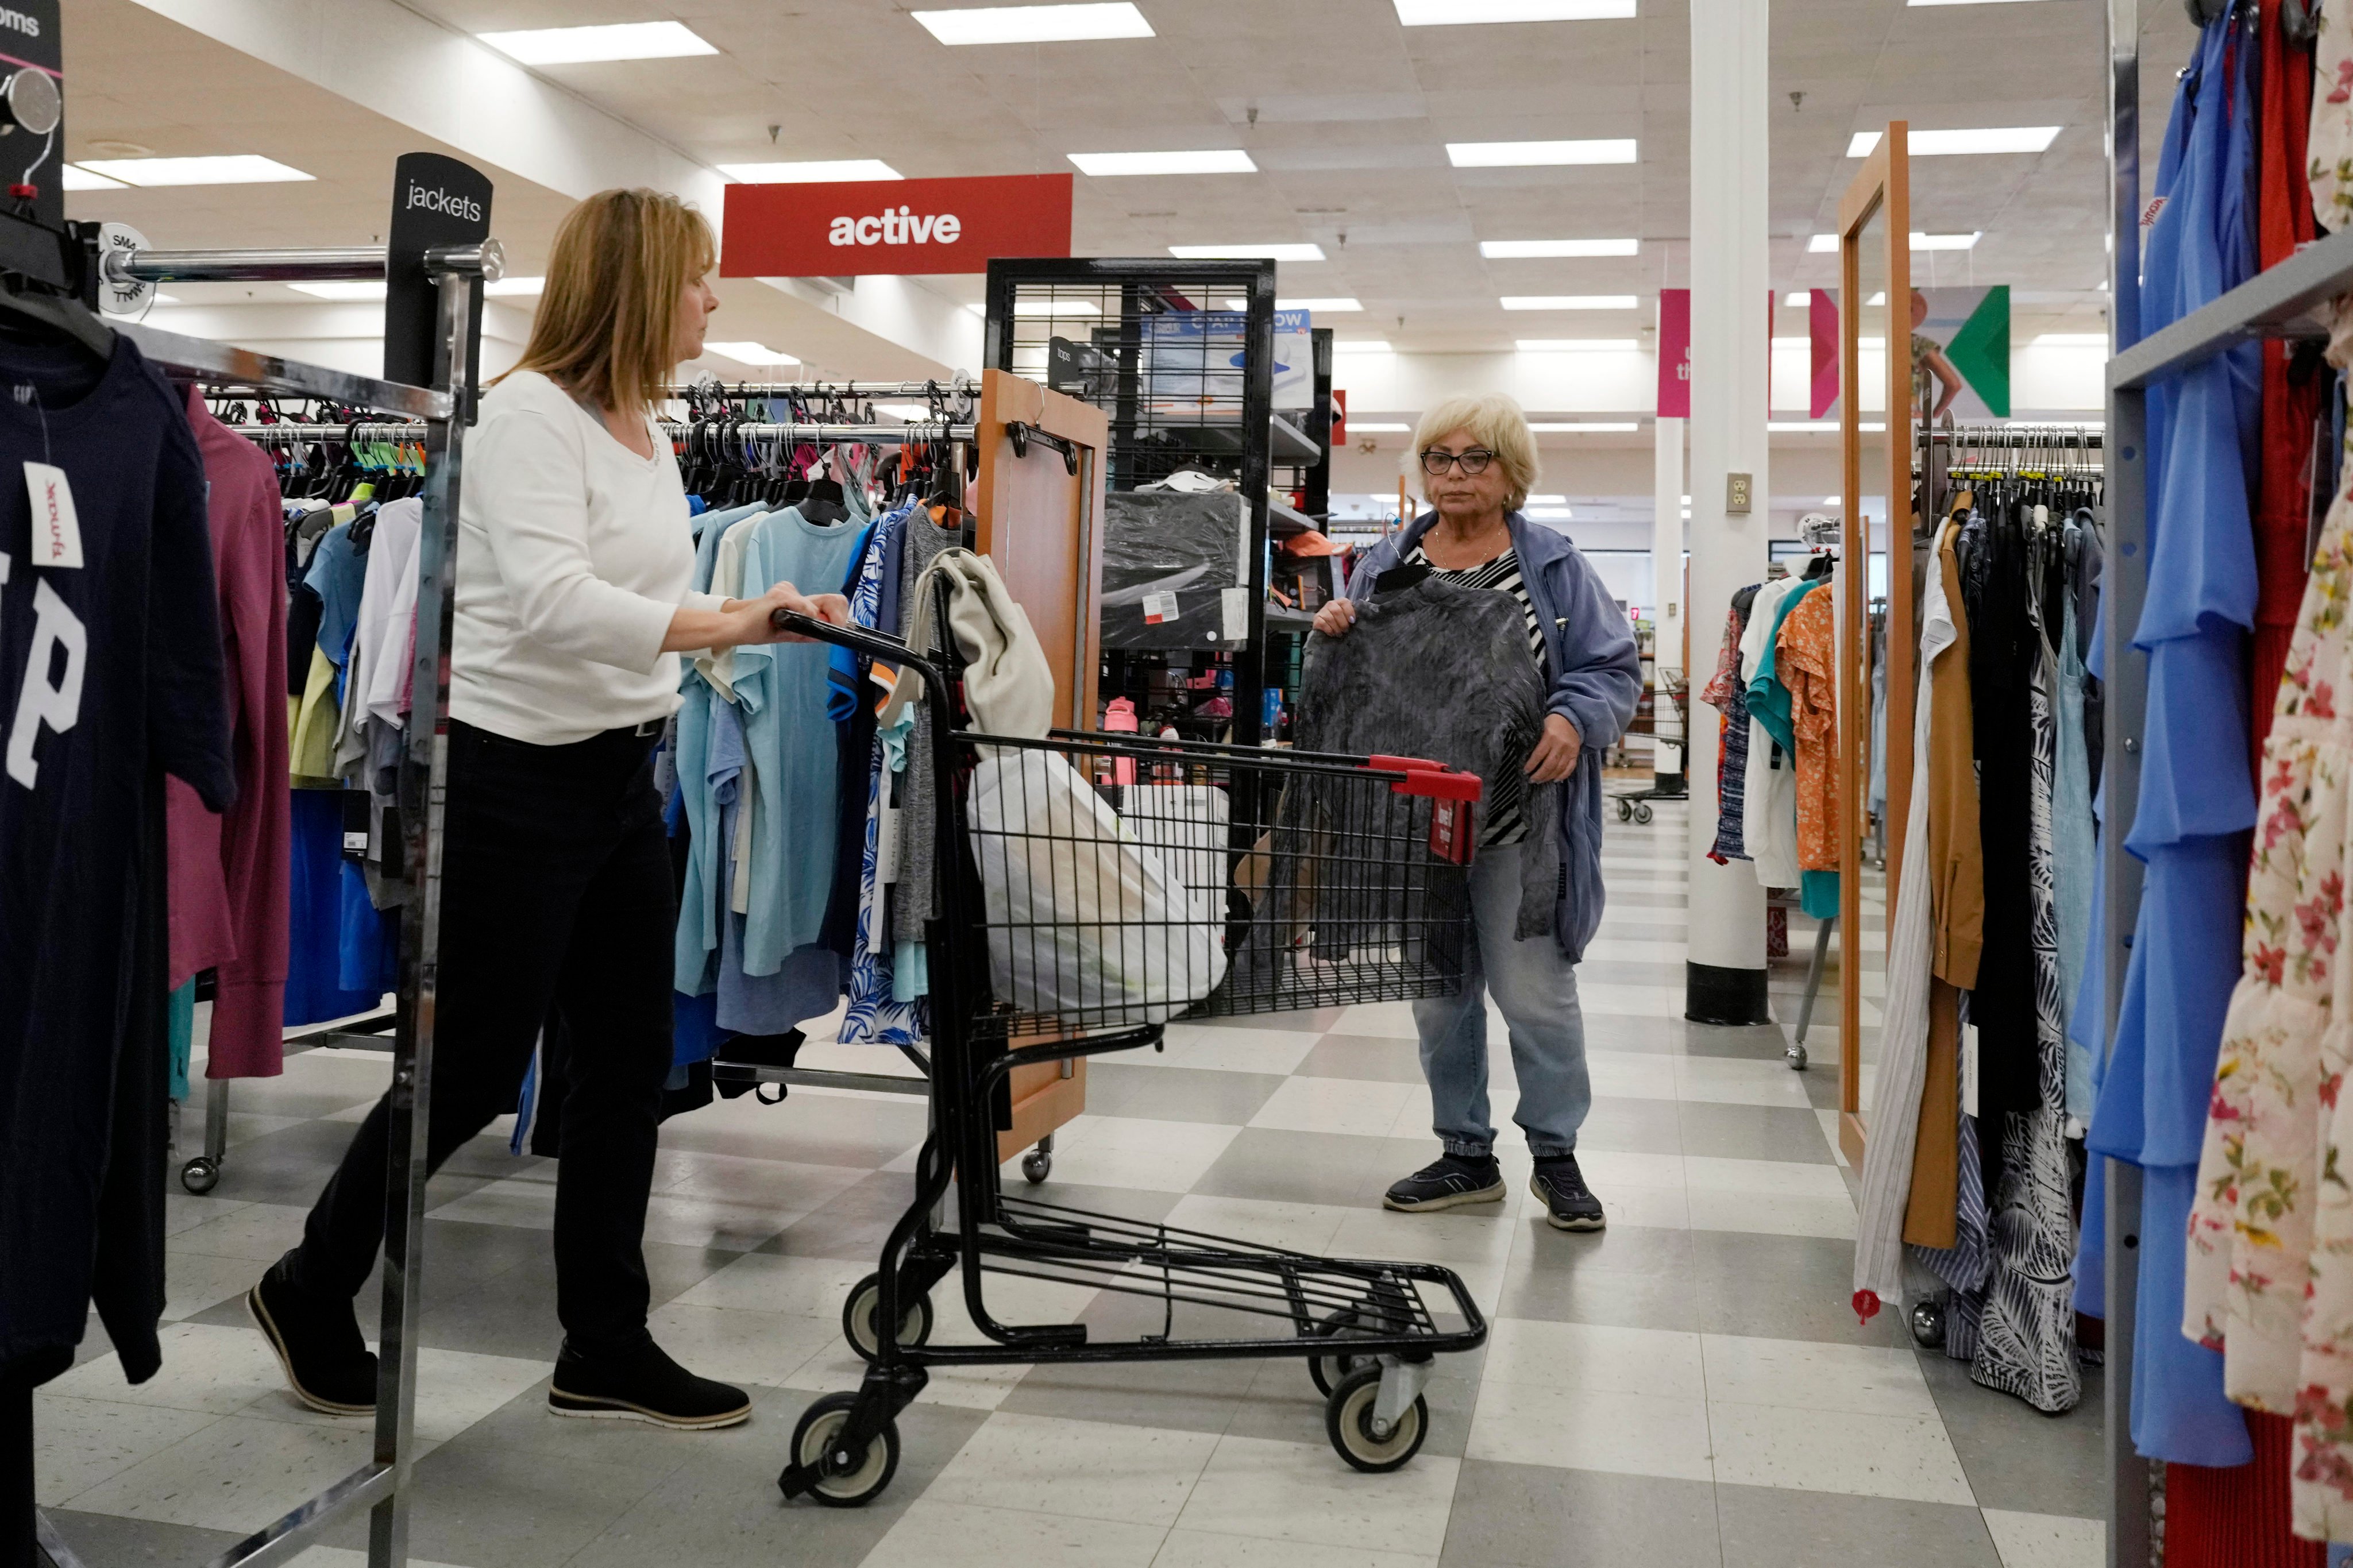 Customers shop at a retail store in Vernon Hills, Illinois, on June 12. The highly anticipated US recession still has not arrived as consumers keep spending and employers keep hiring despite higher borrowing costs. Photo: AP